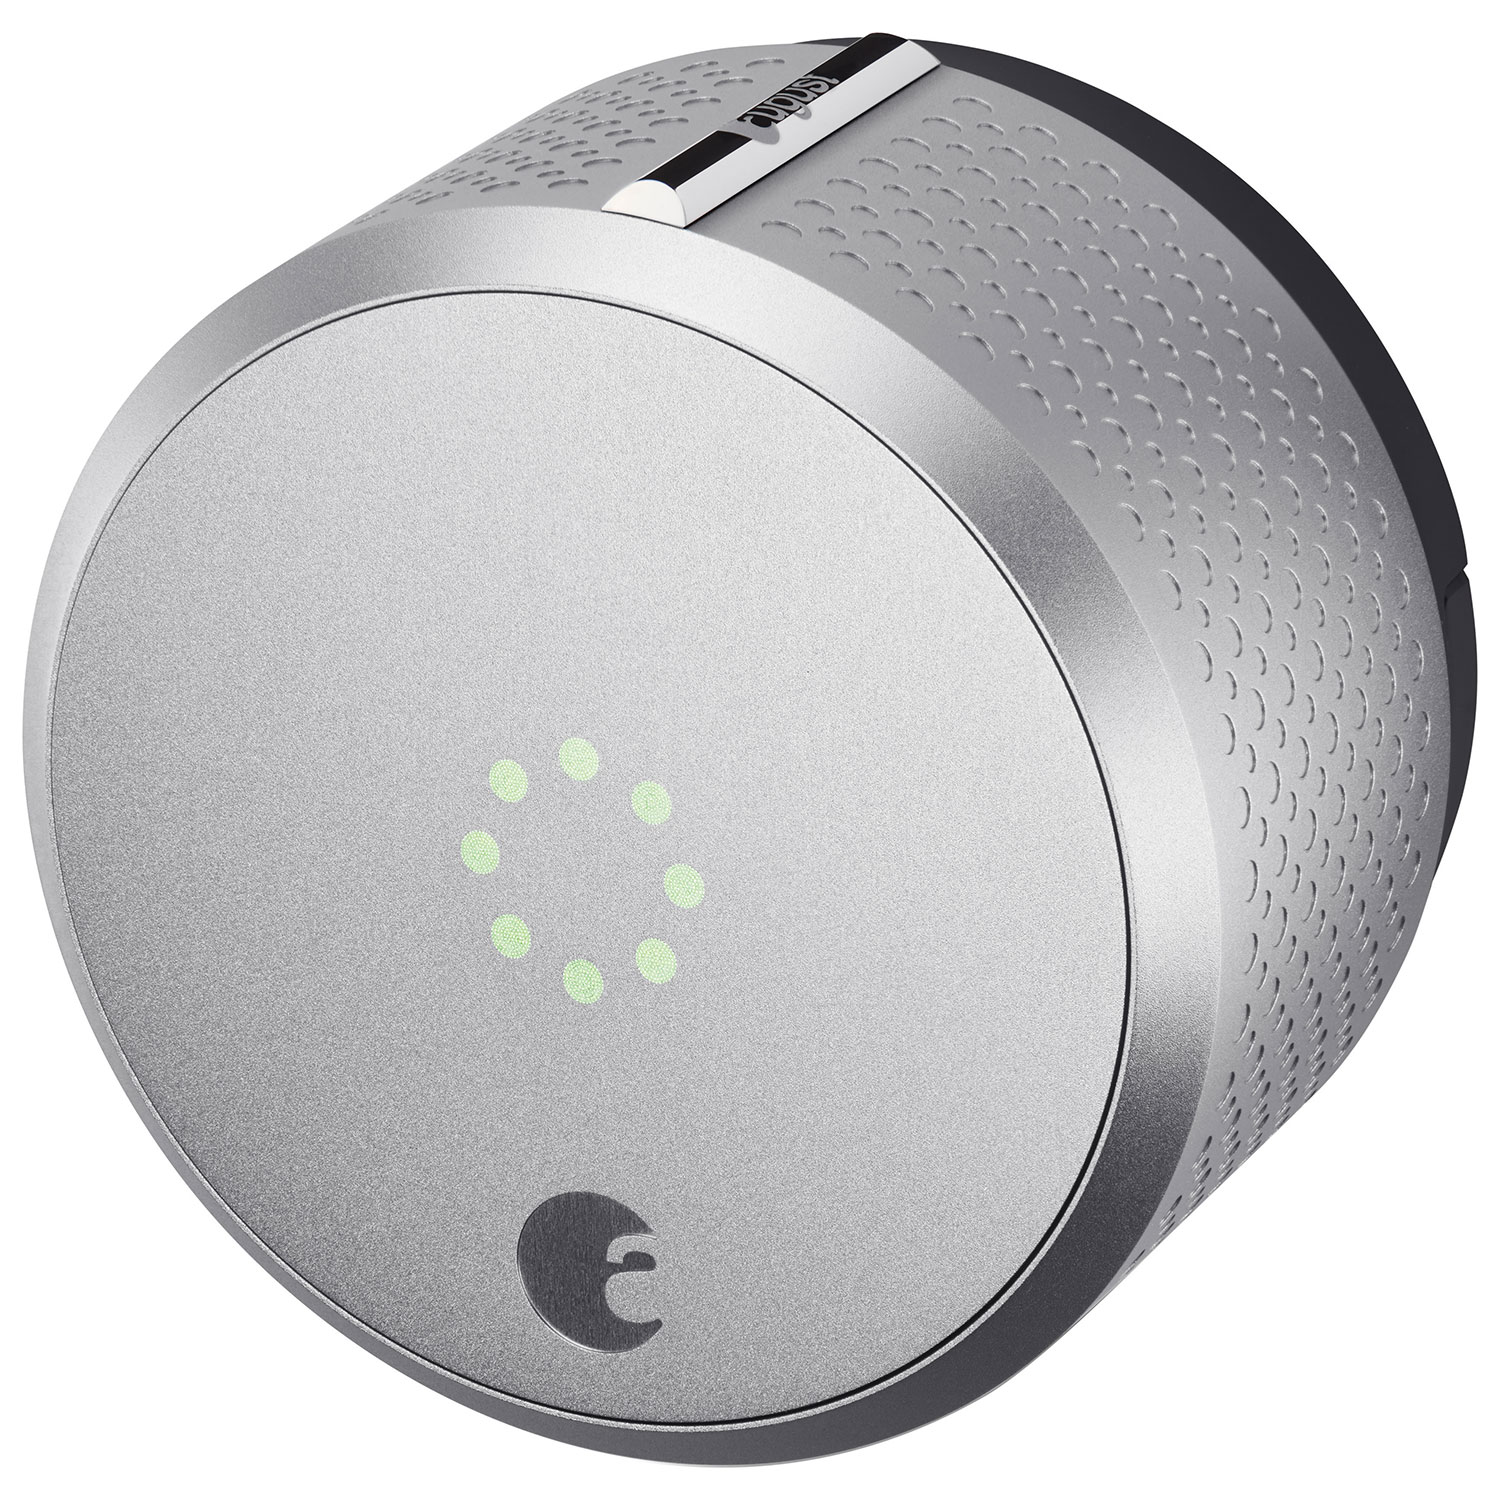 august smart lock home safety